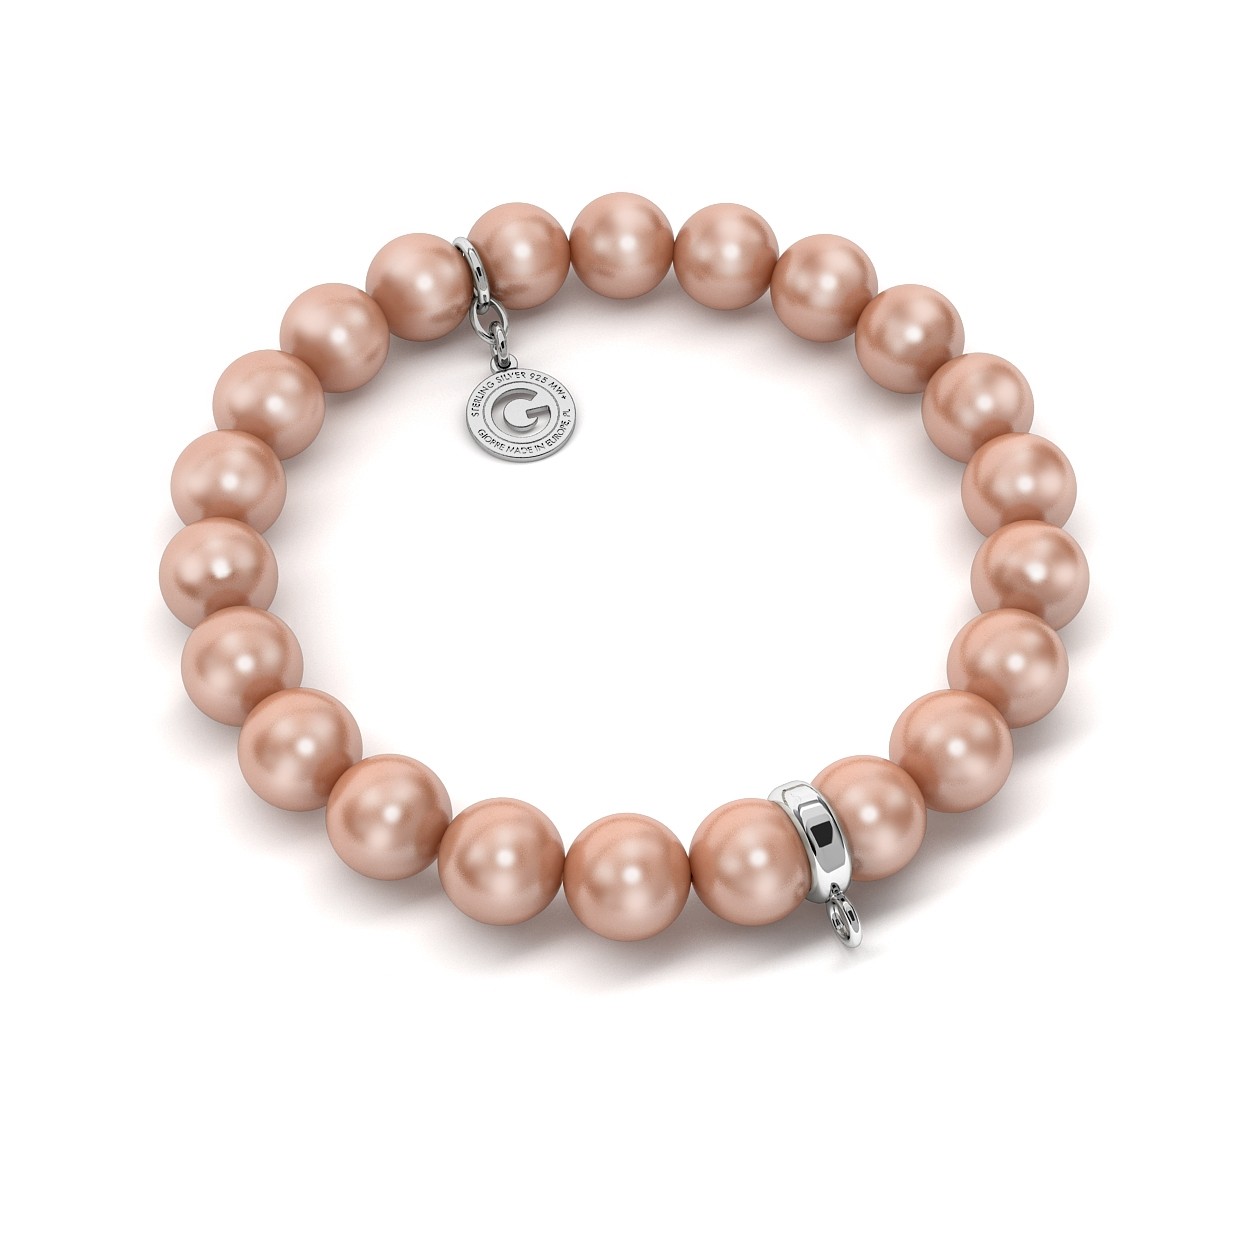 FLEXIBLE BRACELET WITH PEARLS (SWAROVSKI PEARL) FOR 1 CHARM, SILVER 925, RHODIUM OR GOLD PLATED